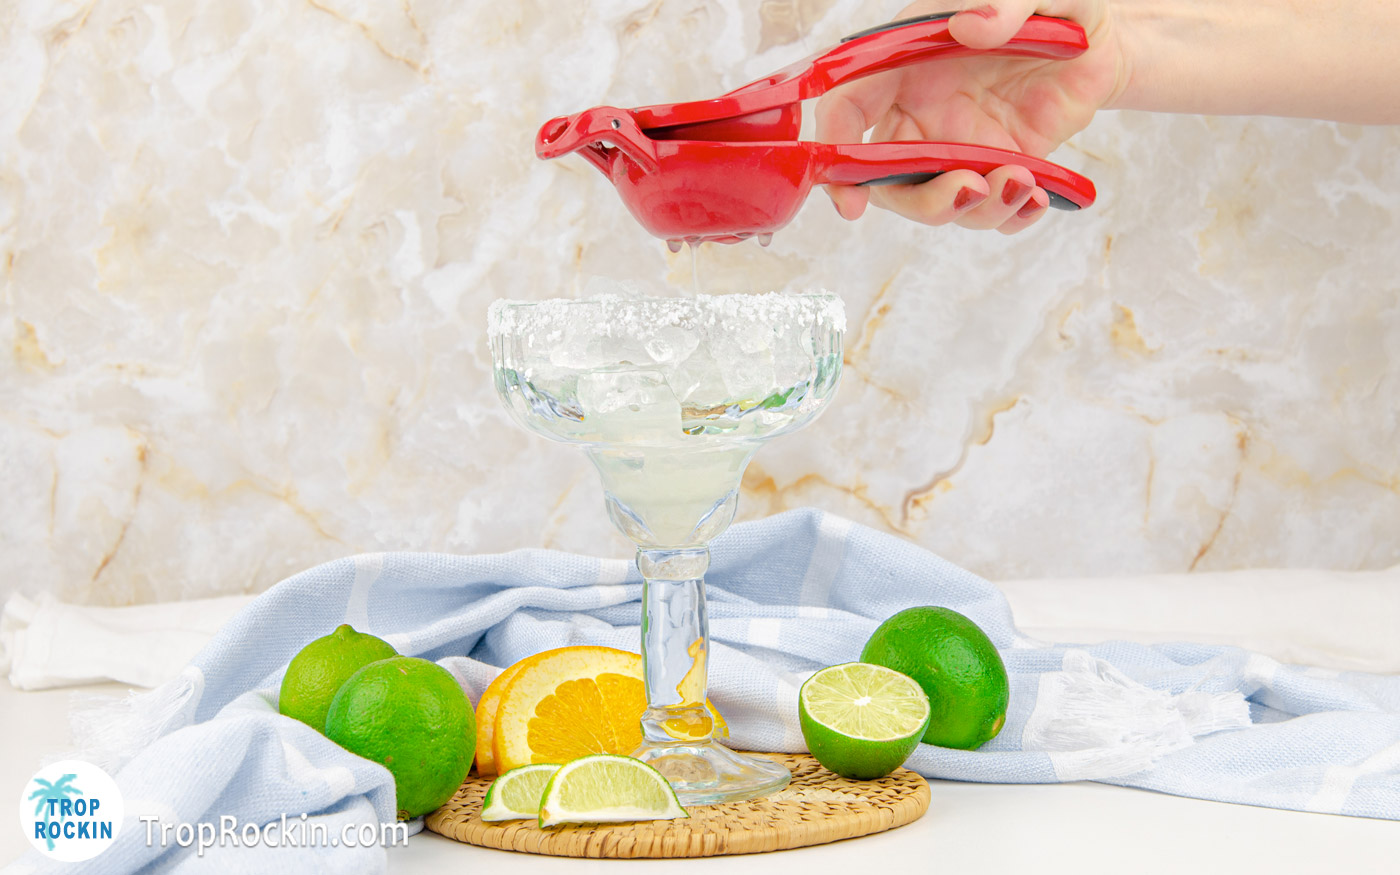 Using a lime squeezer to juice fresh limes into margarita glass.